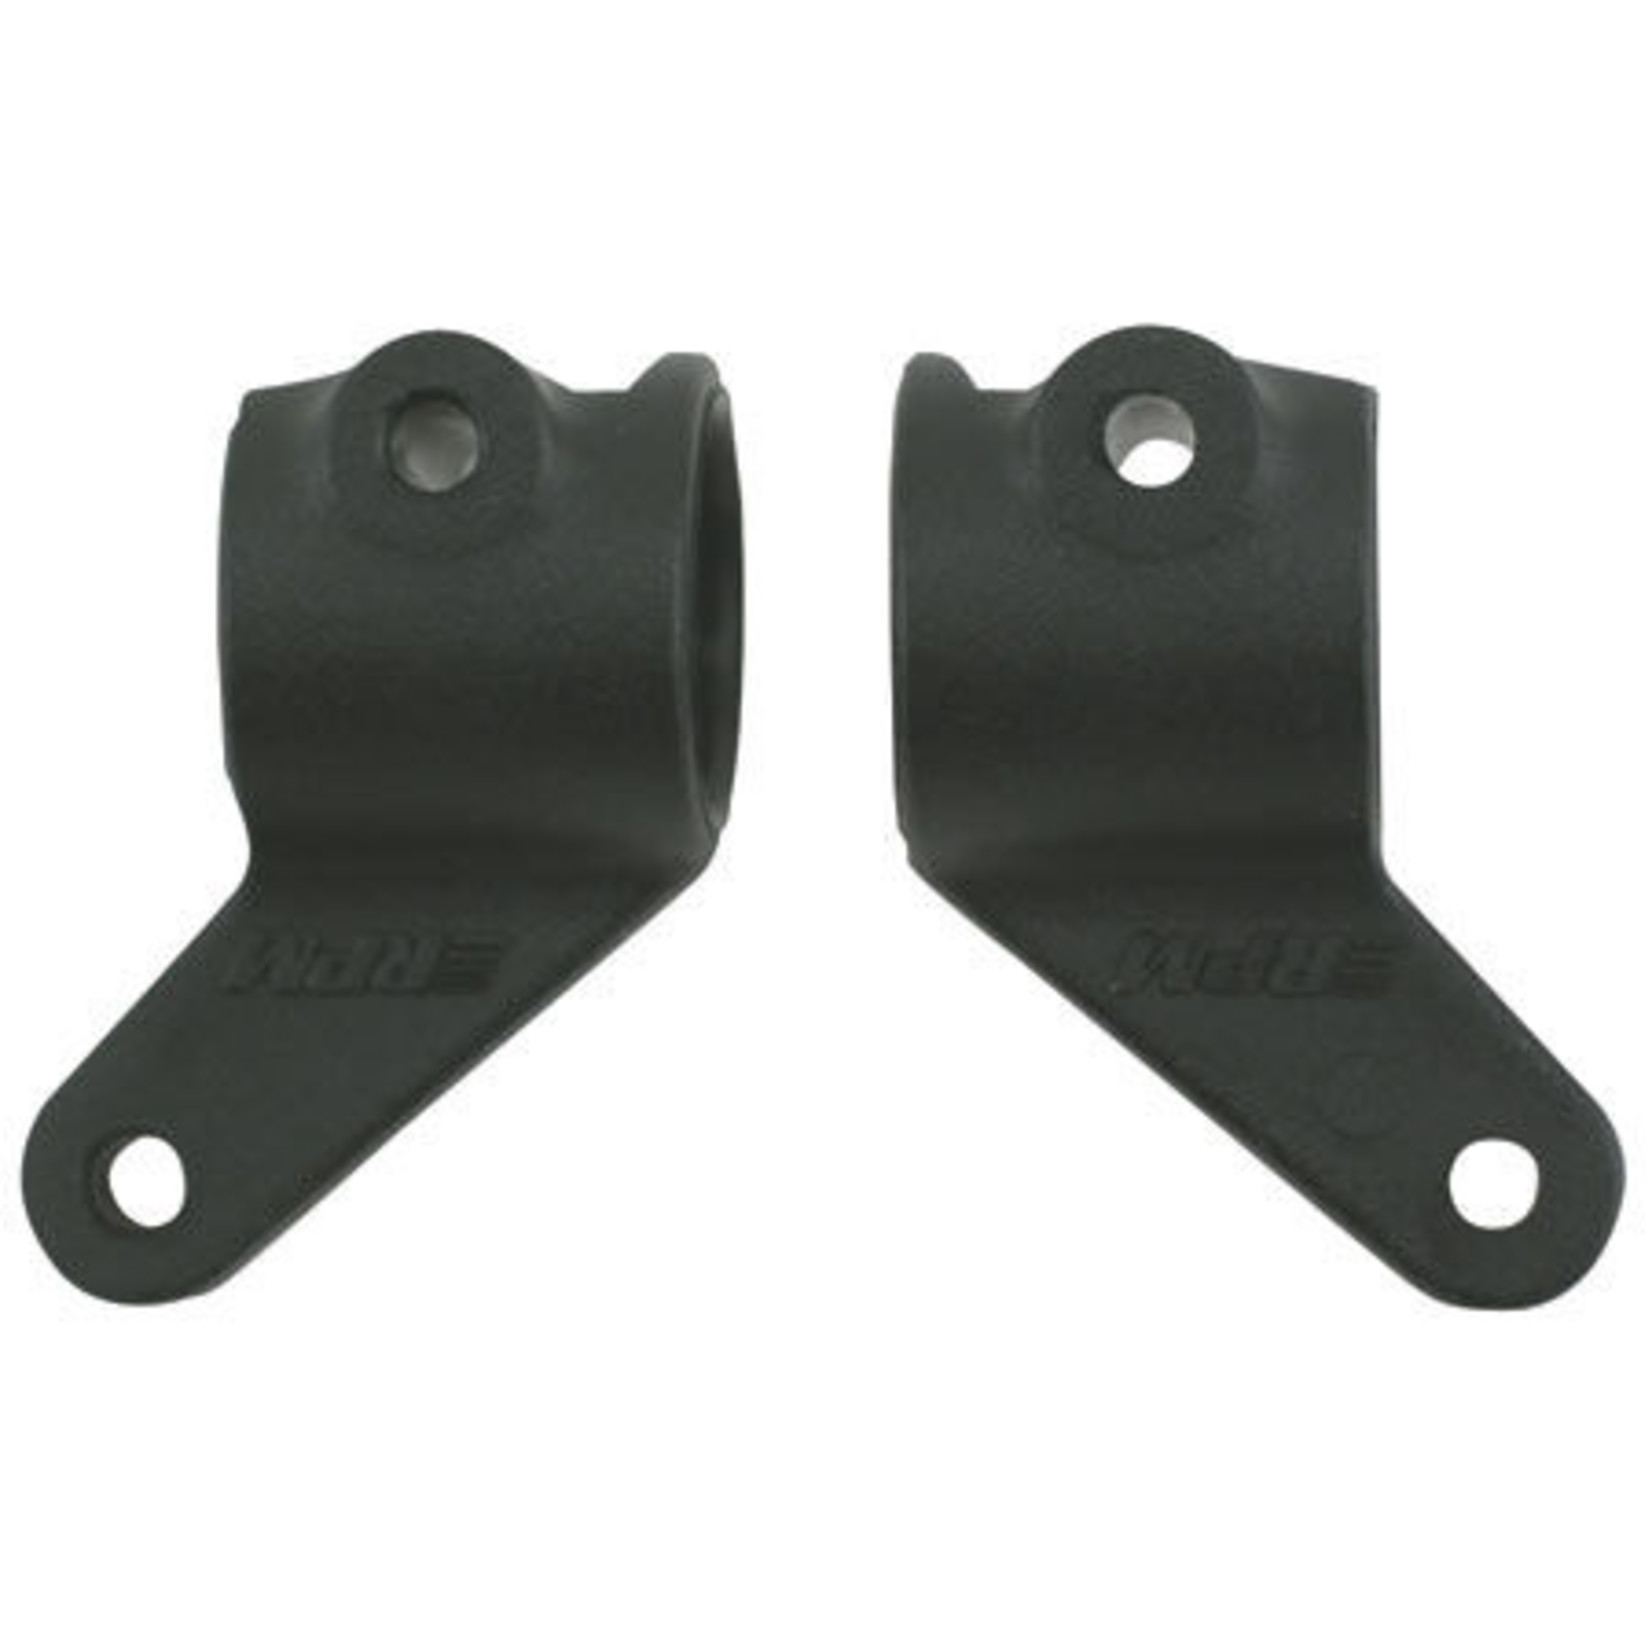 RPM Front Bearing Carriers, Black: RU, ST, BA, SLH